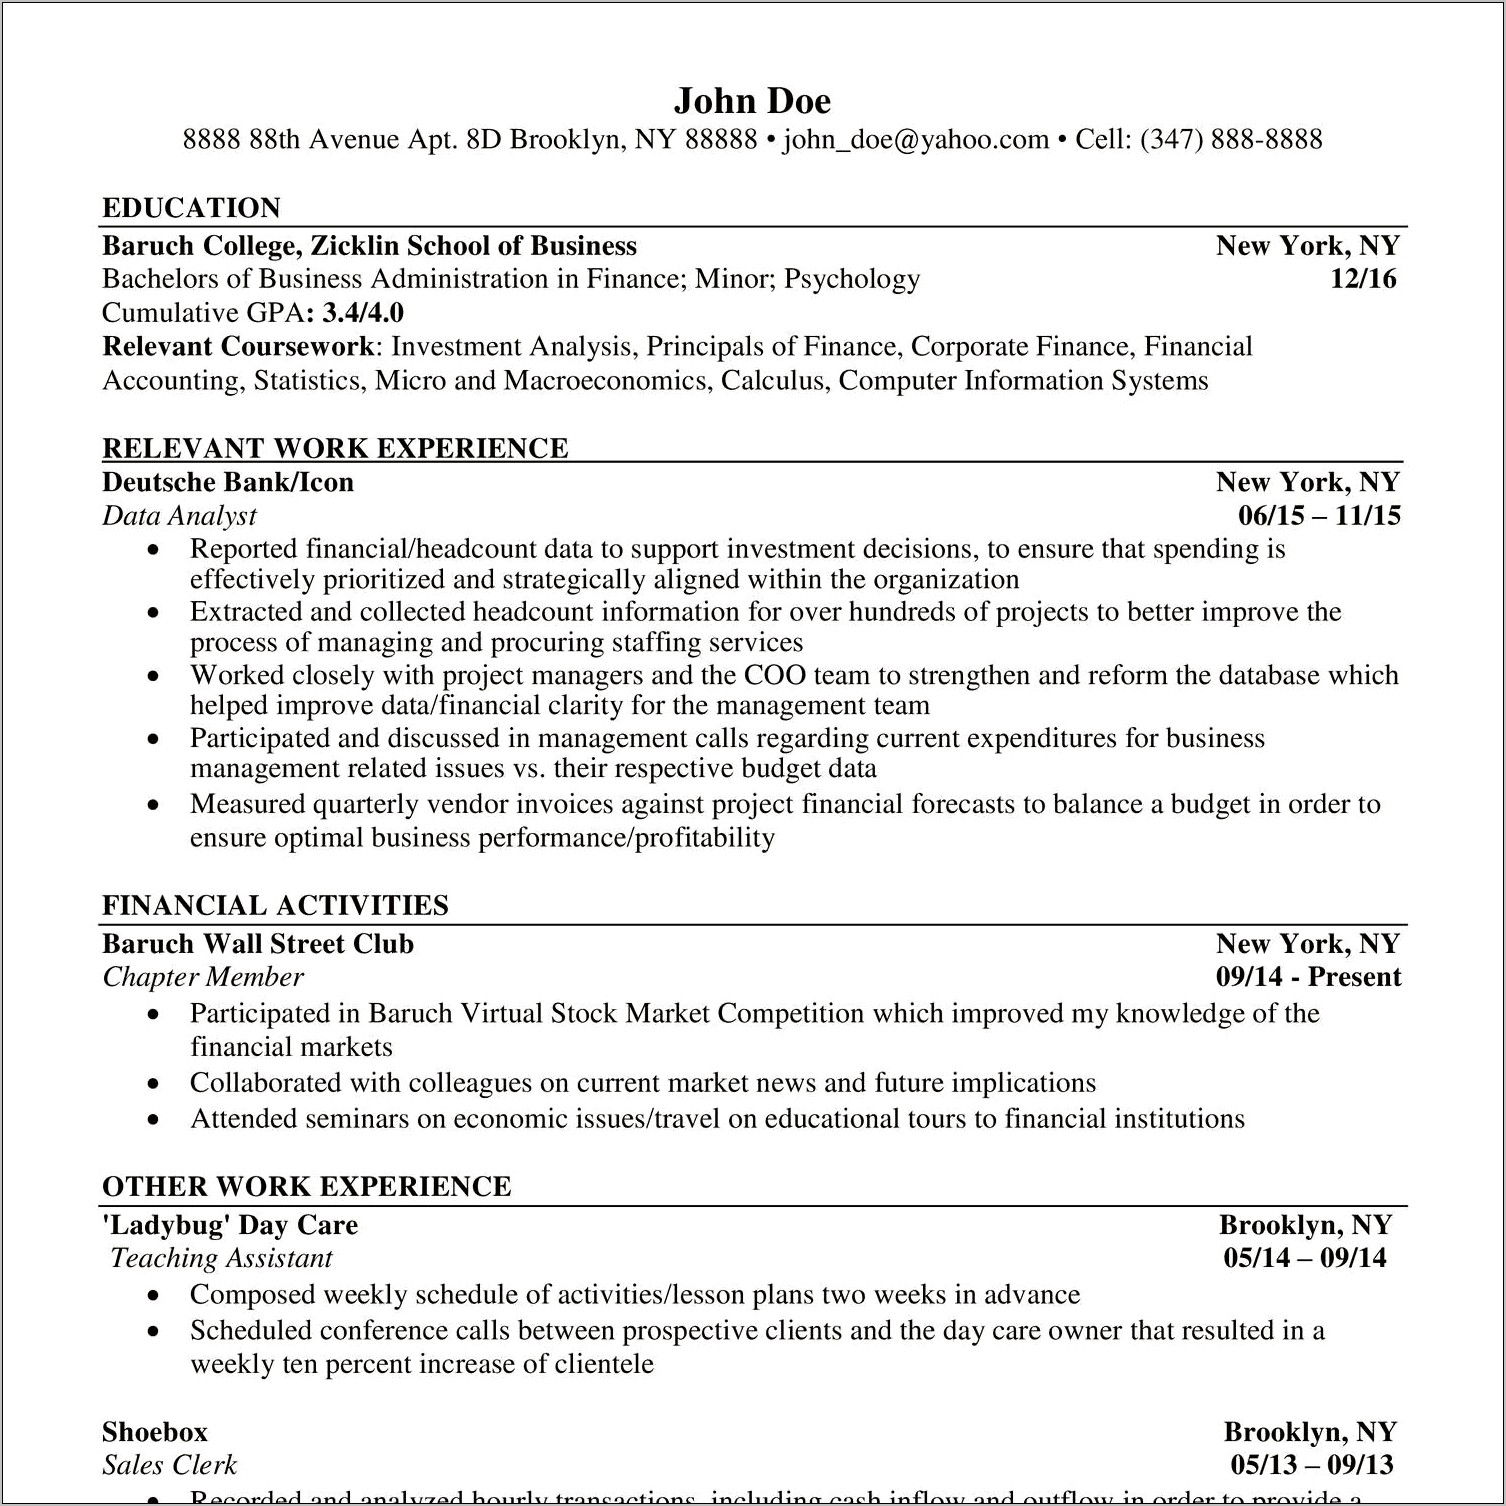 Is An Objective Necessary On A Resume Reddit